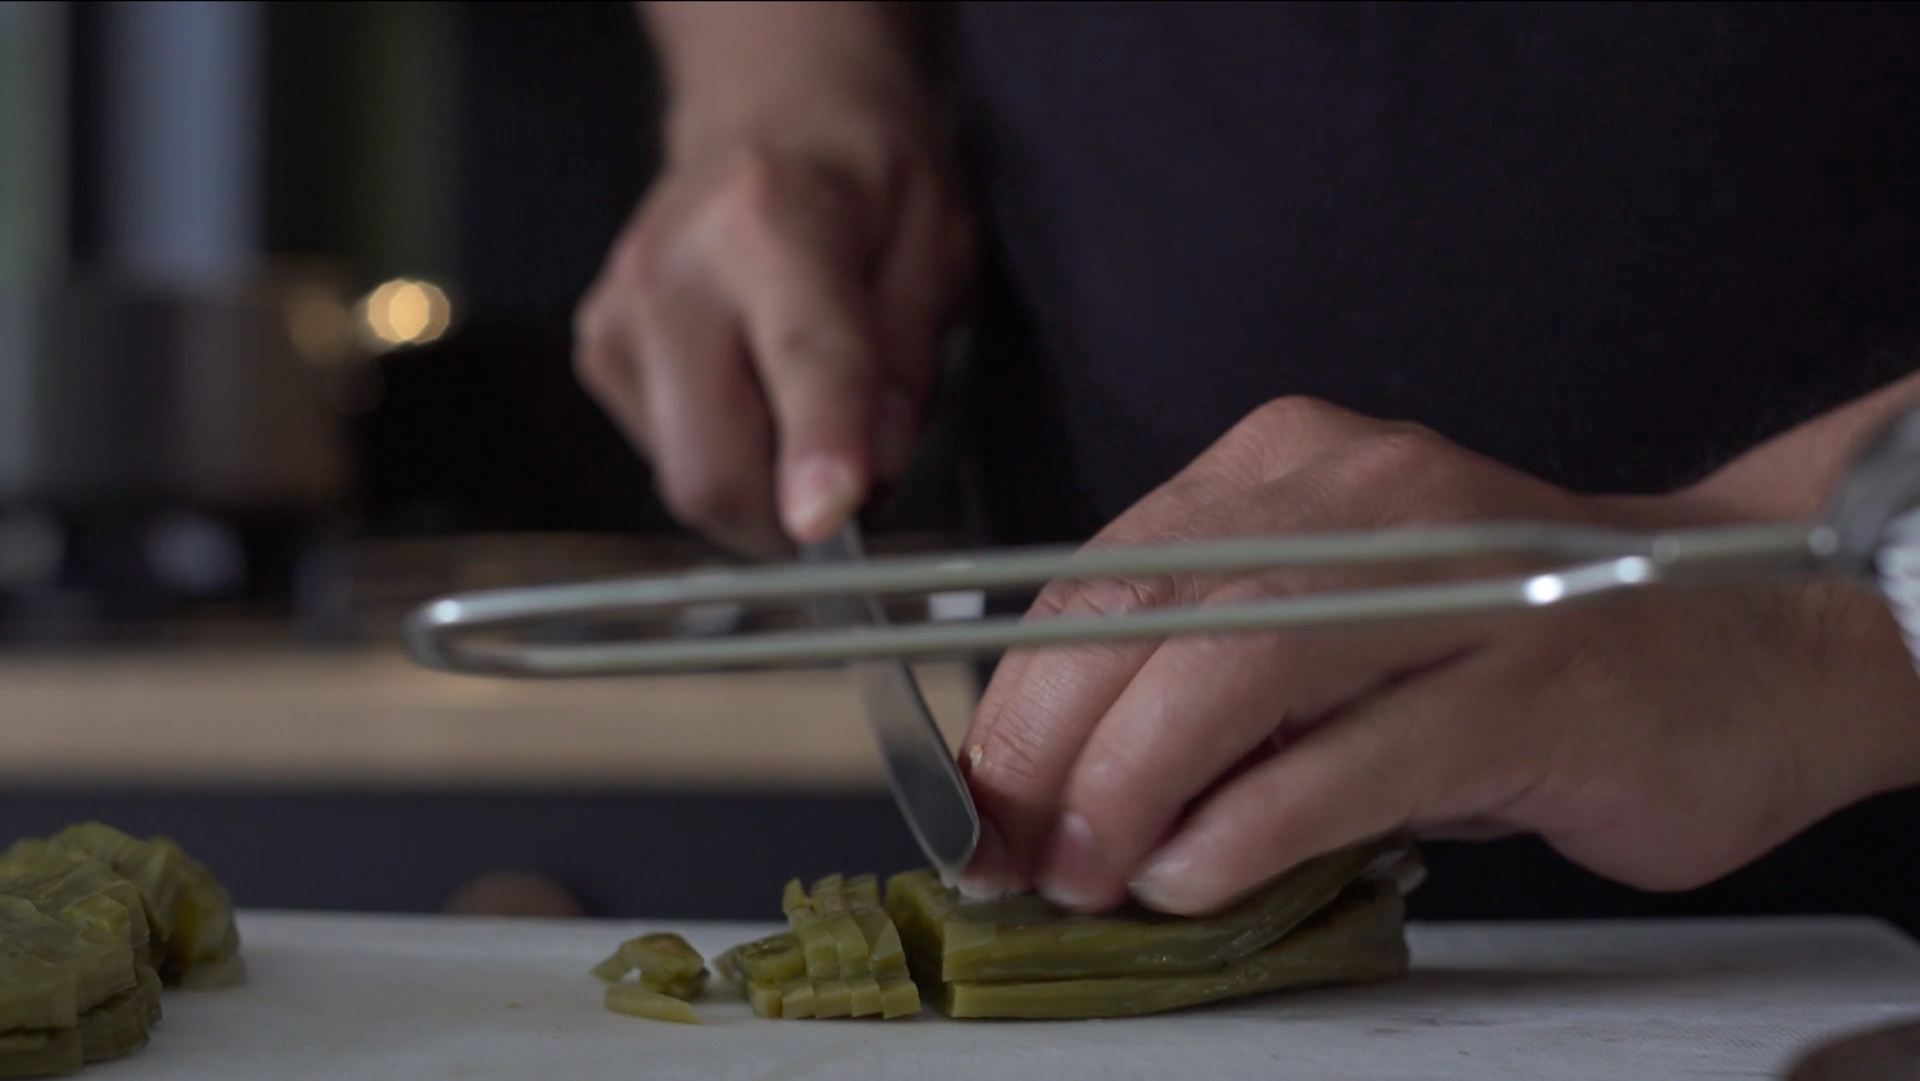 A shot of hands chopping vegetables.